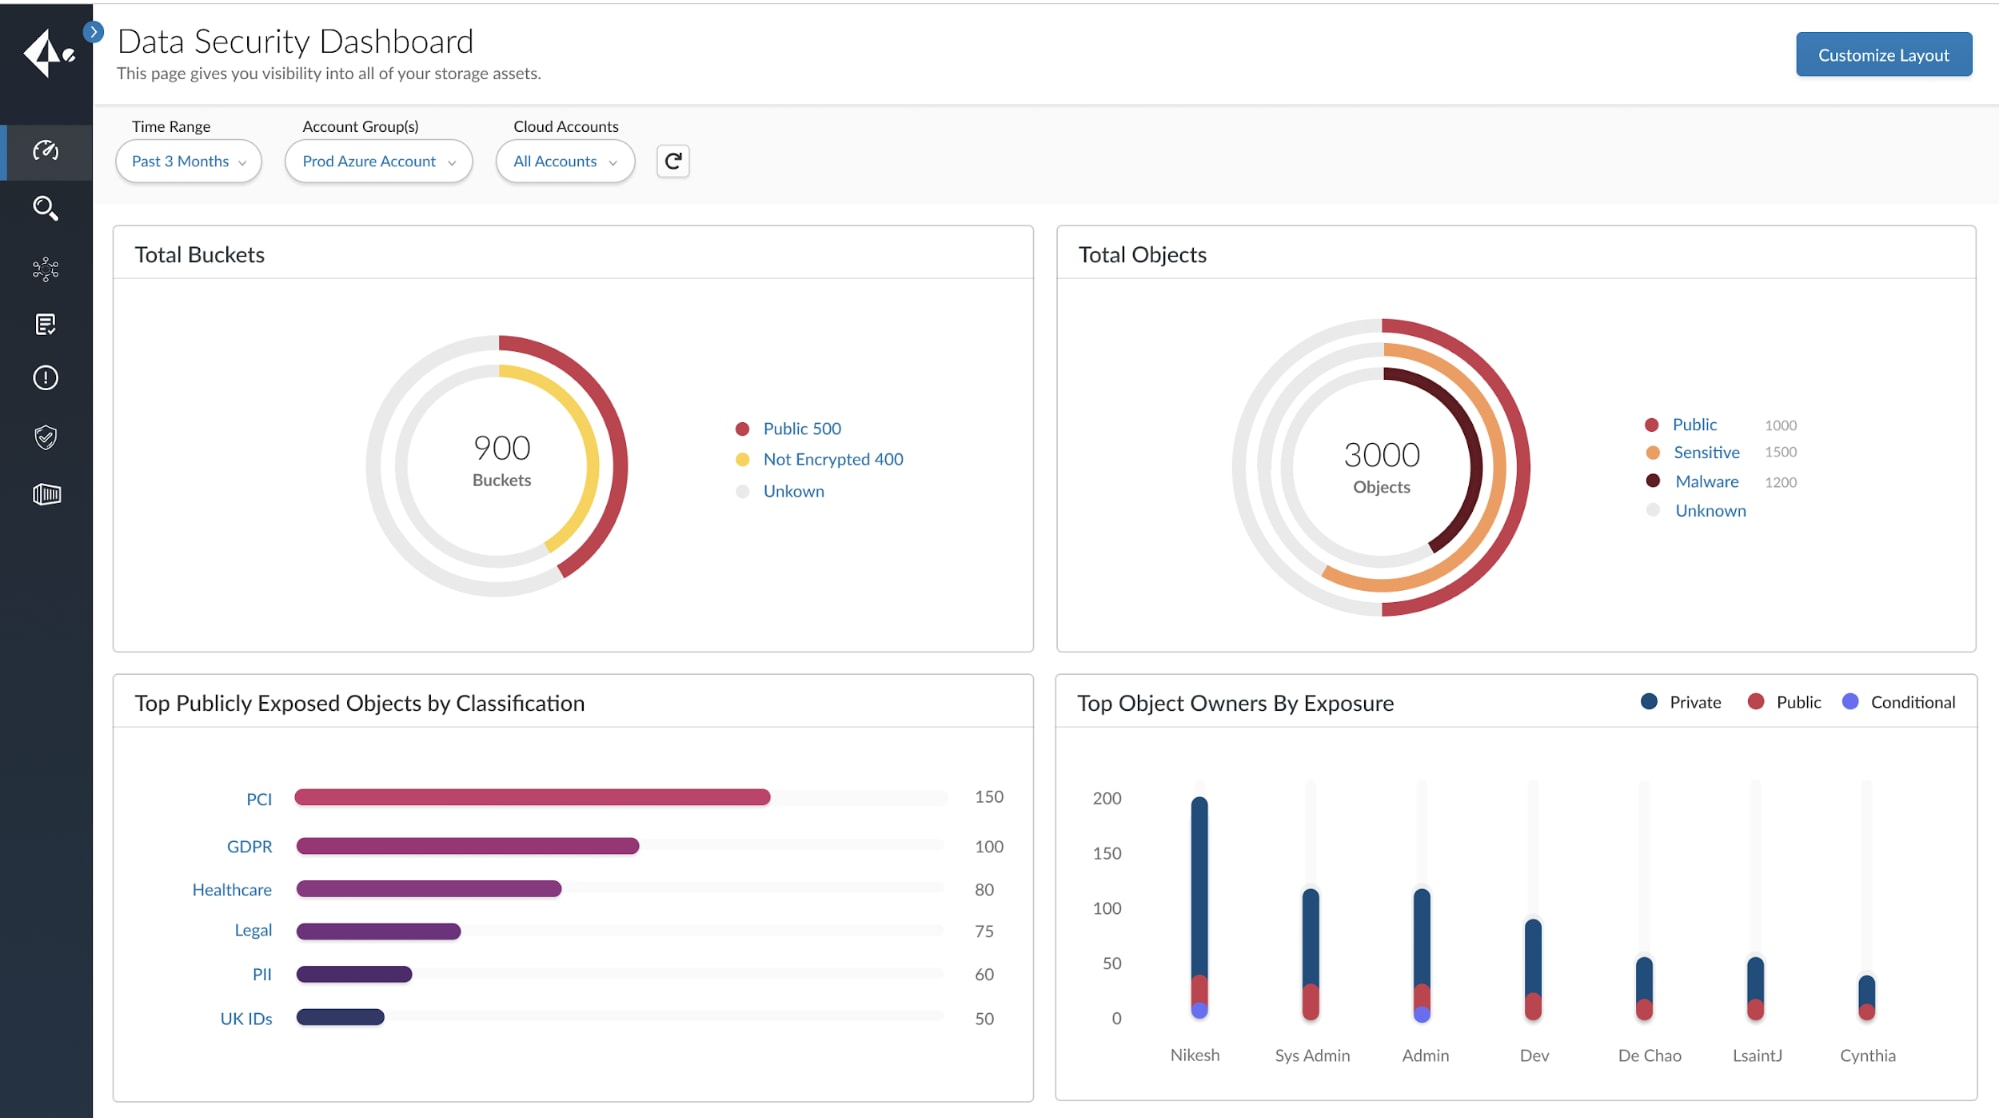 This screenshot shows the Data Security Dashboard in Prisma Cloud 2.0, including information such as Total Buckets, Total Objects, Top Publicly Exposed Objects by Classification, and Top Object Owners by Exposure.